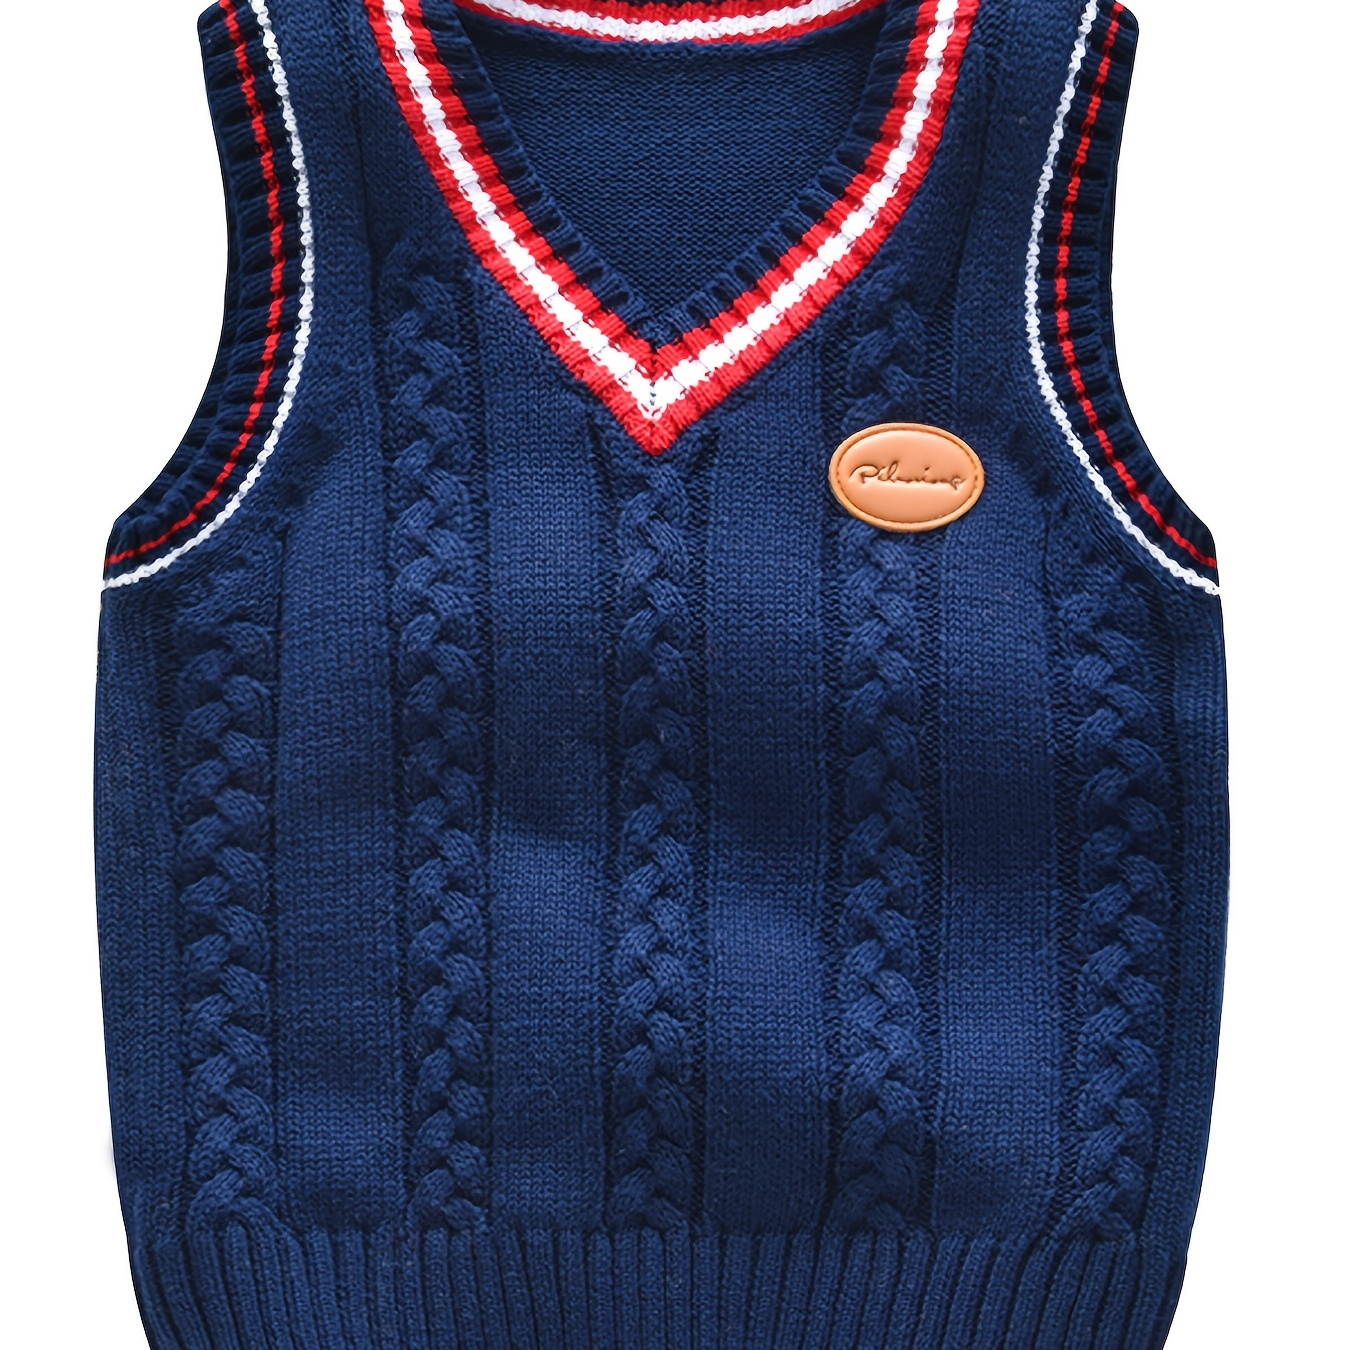 Boys V-neck Cable Knit Vest College Style Sleeveless Pullover Sweater Top Kids Clothes